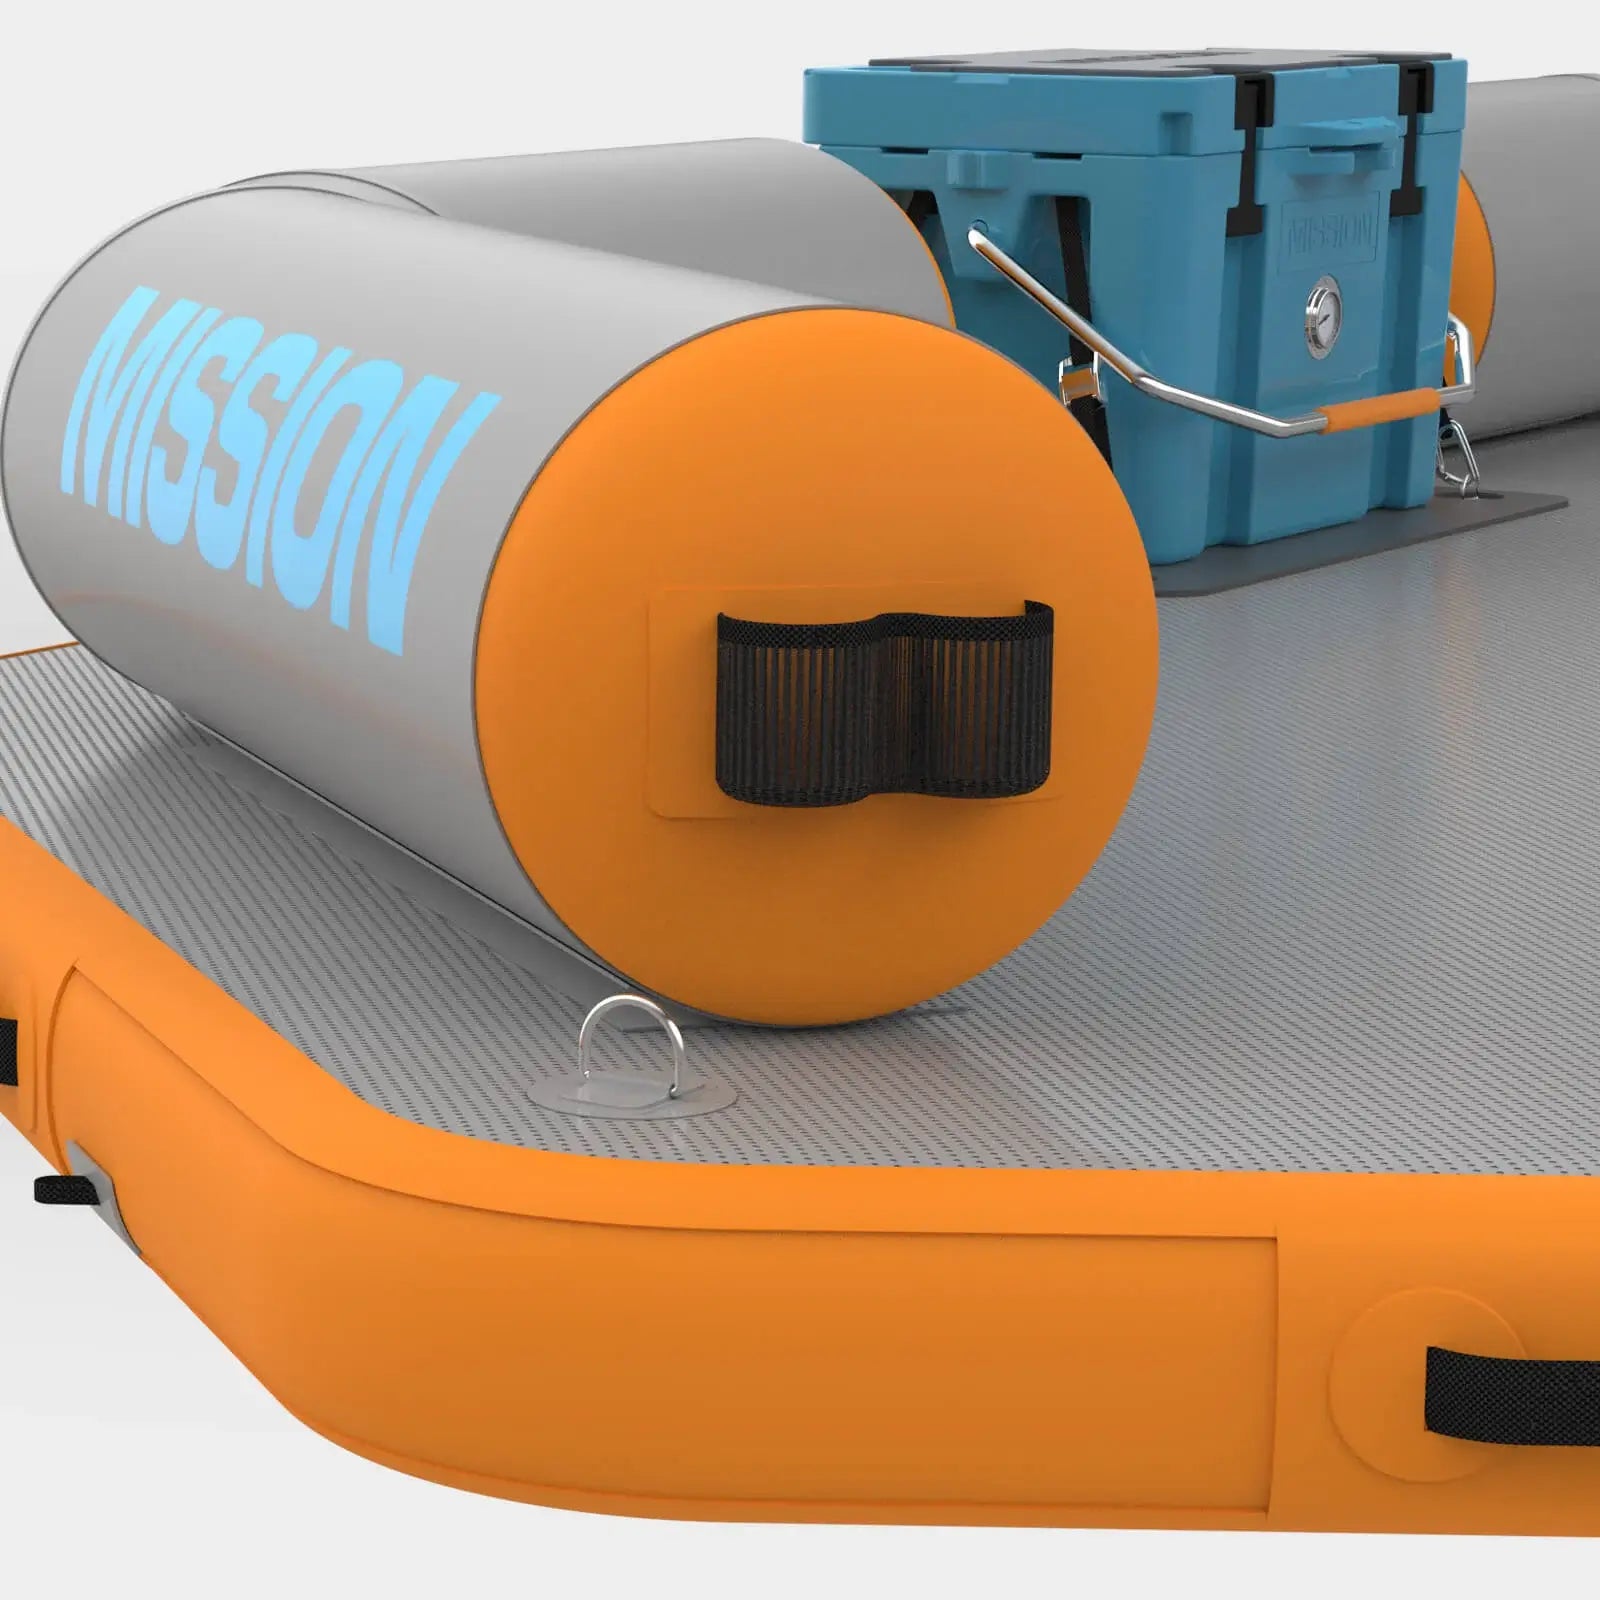 An MISSION Reef Deck | Inflatable Swim Platform + Lounger with two tanks on it.